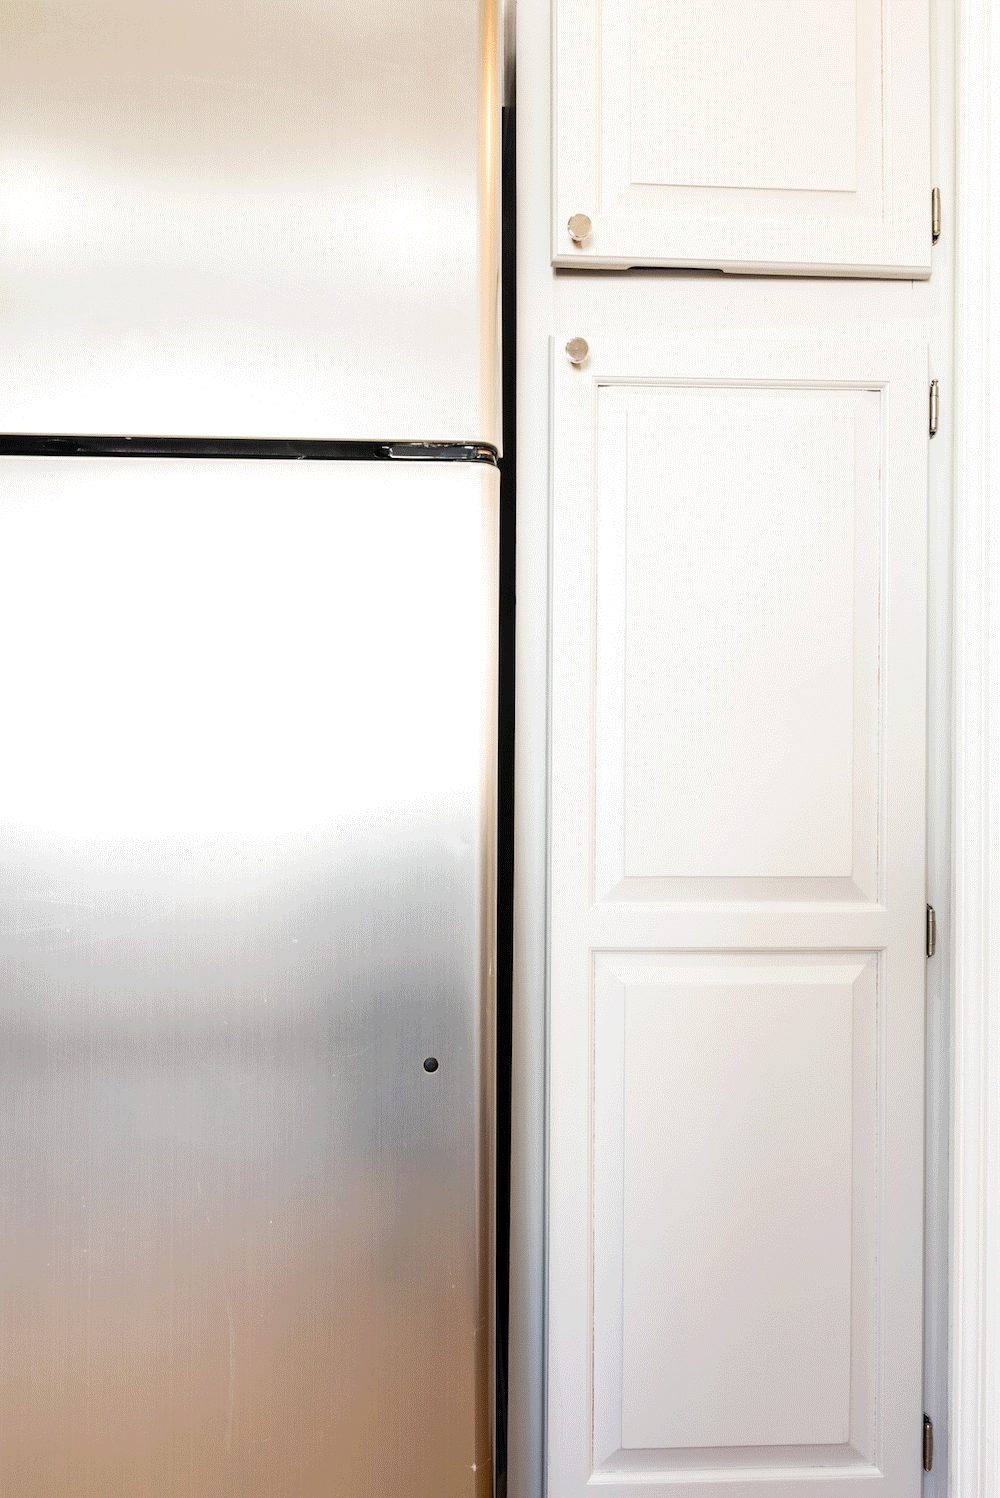 white cabinets with knobs near refrigerator before renovation